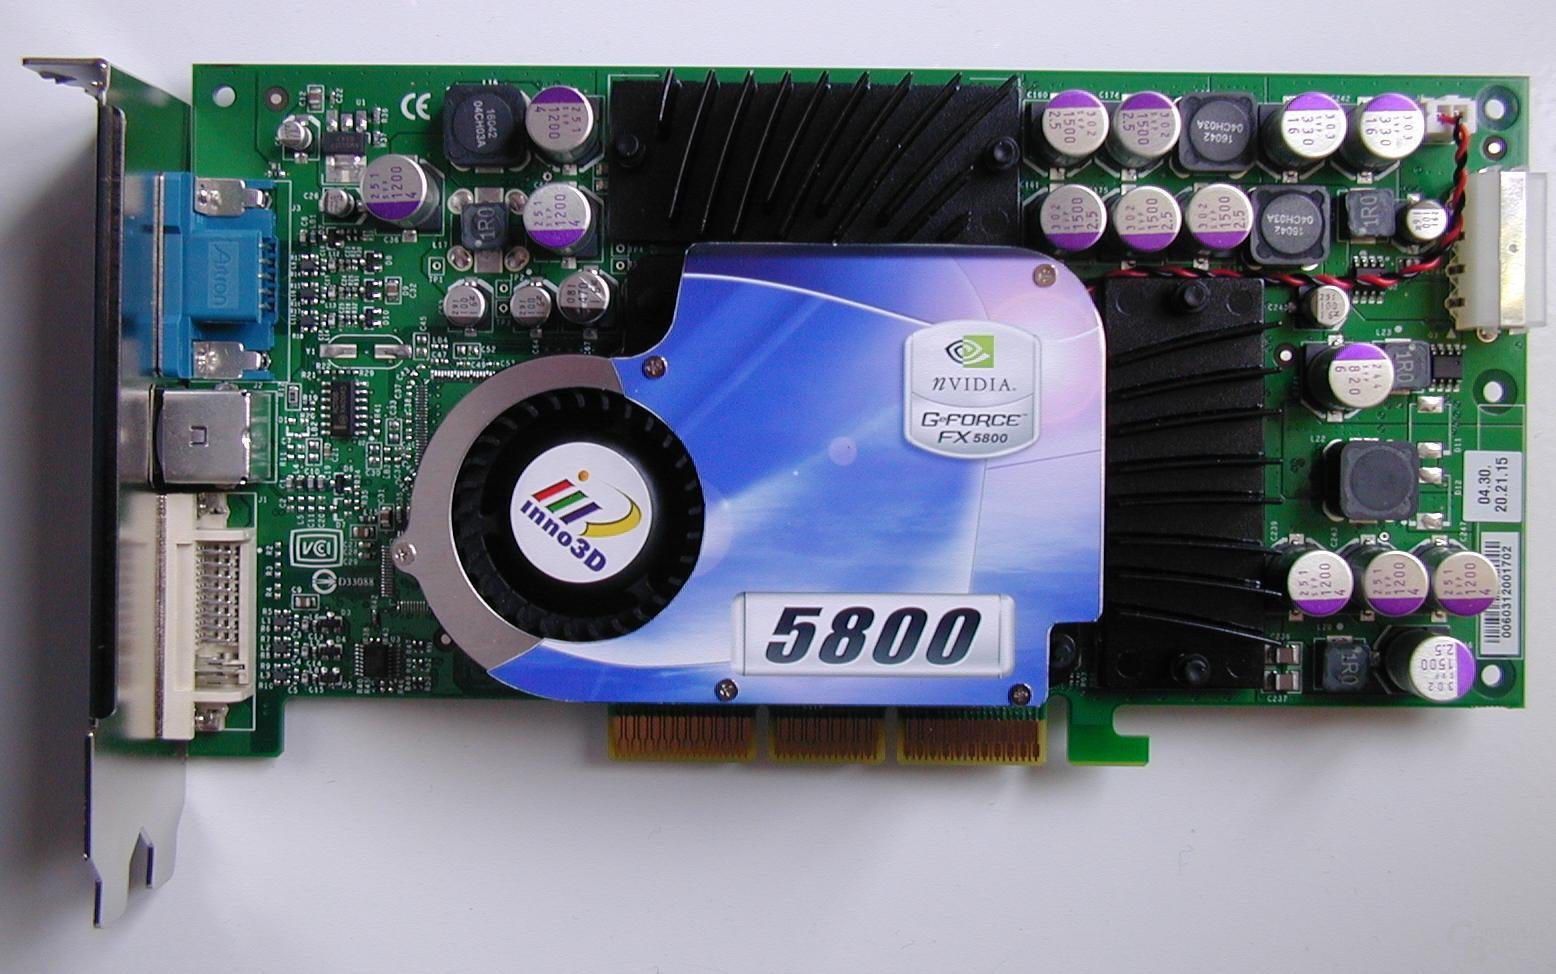 FX5800 – Frontal